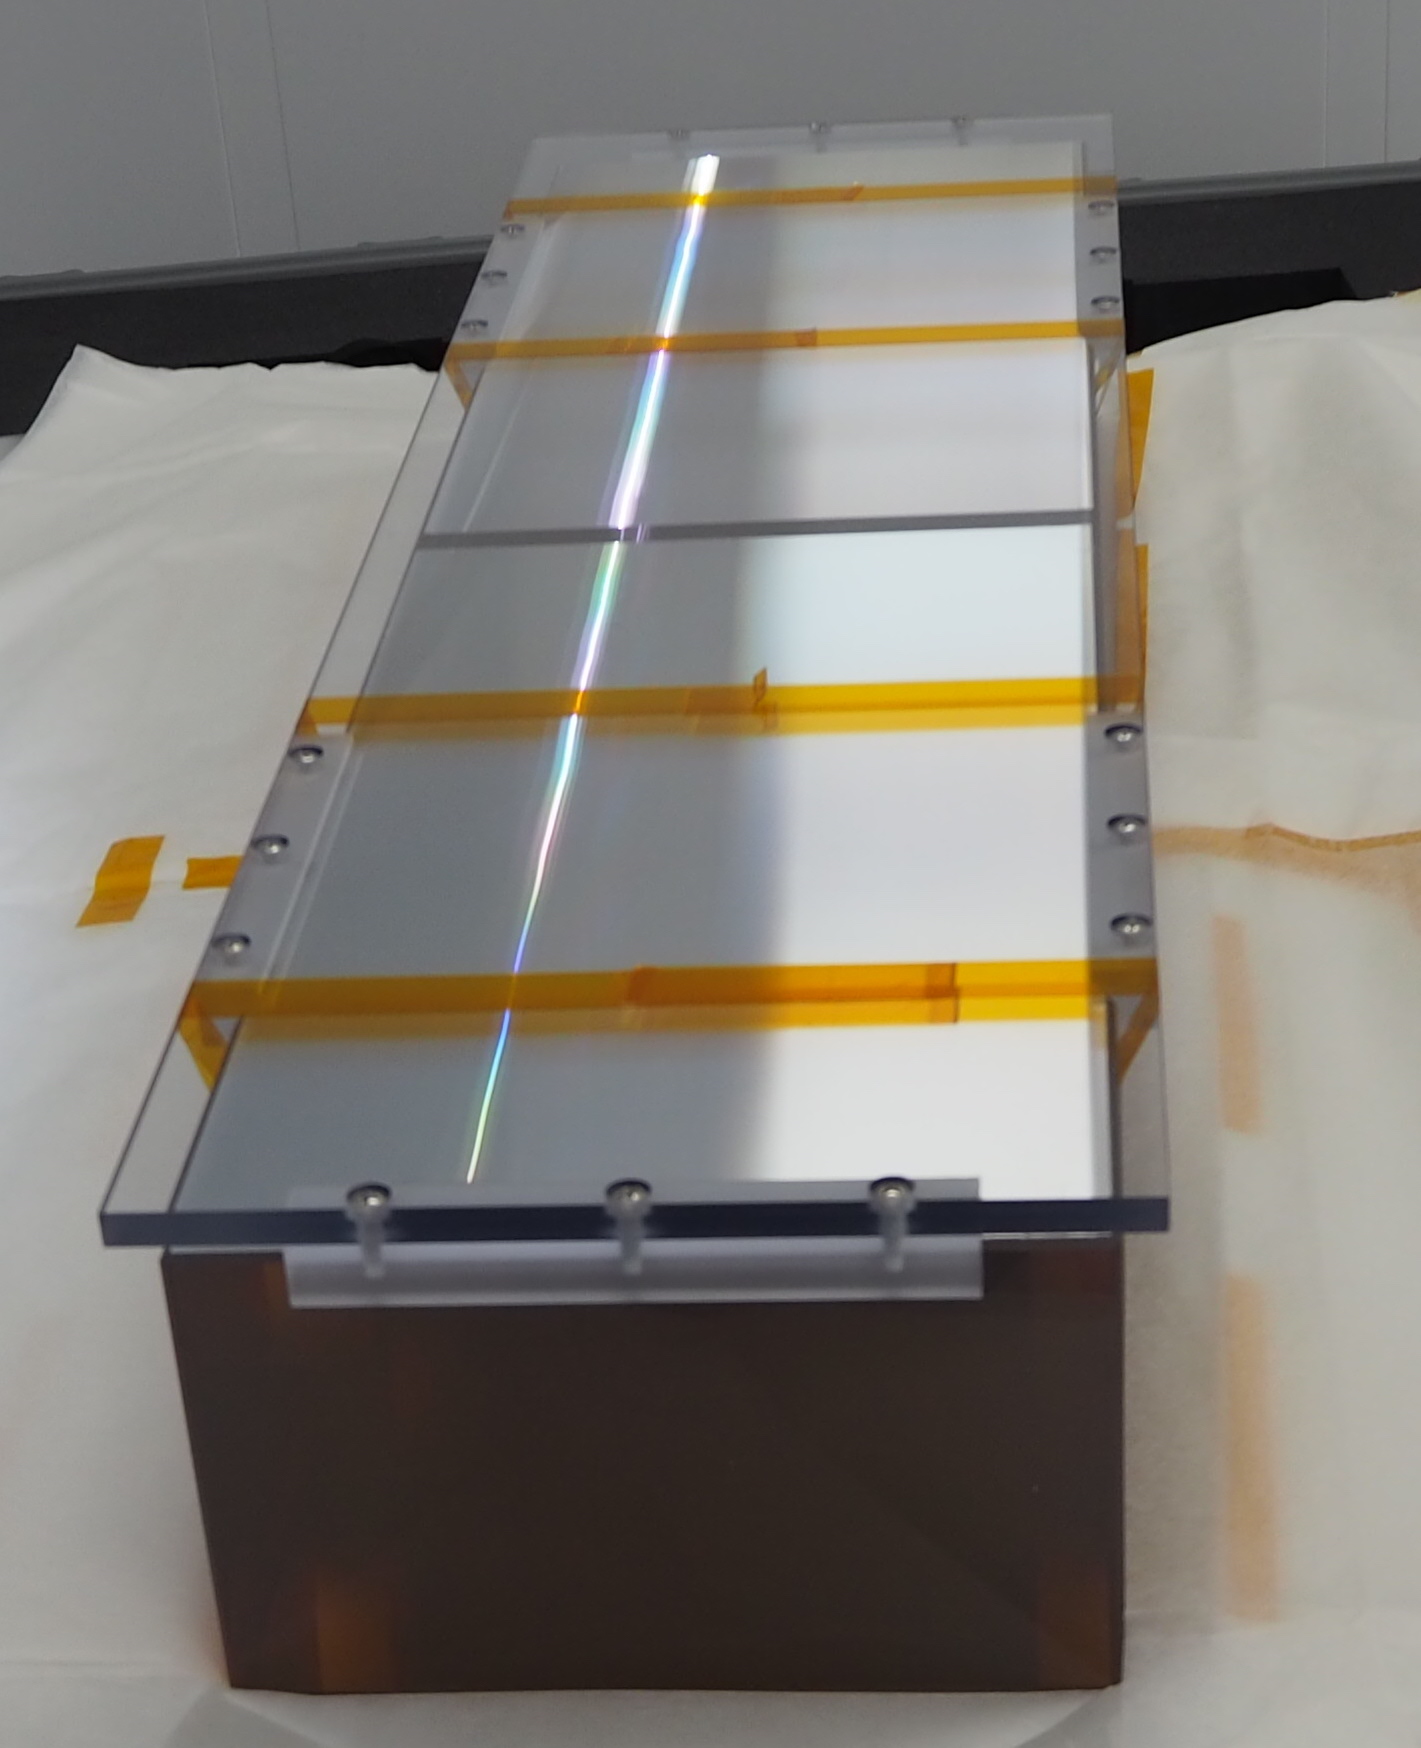 A large diffraction grating